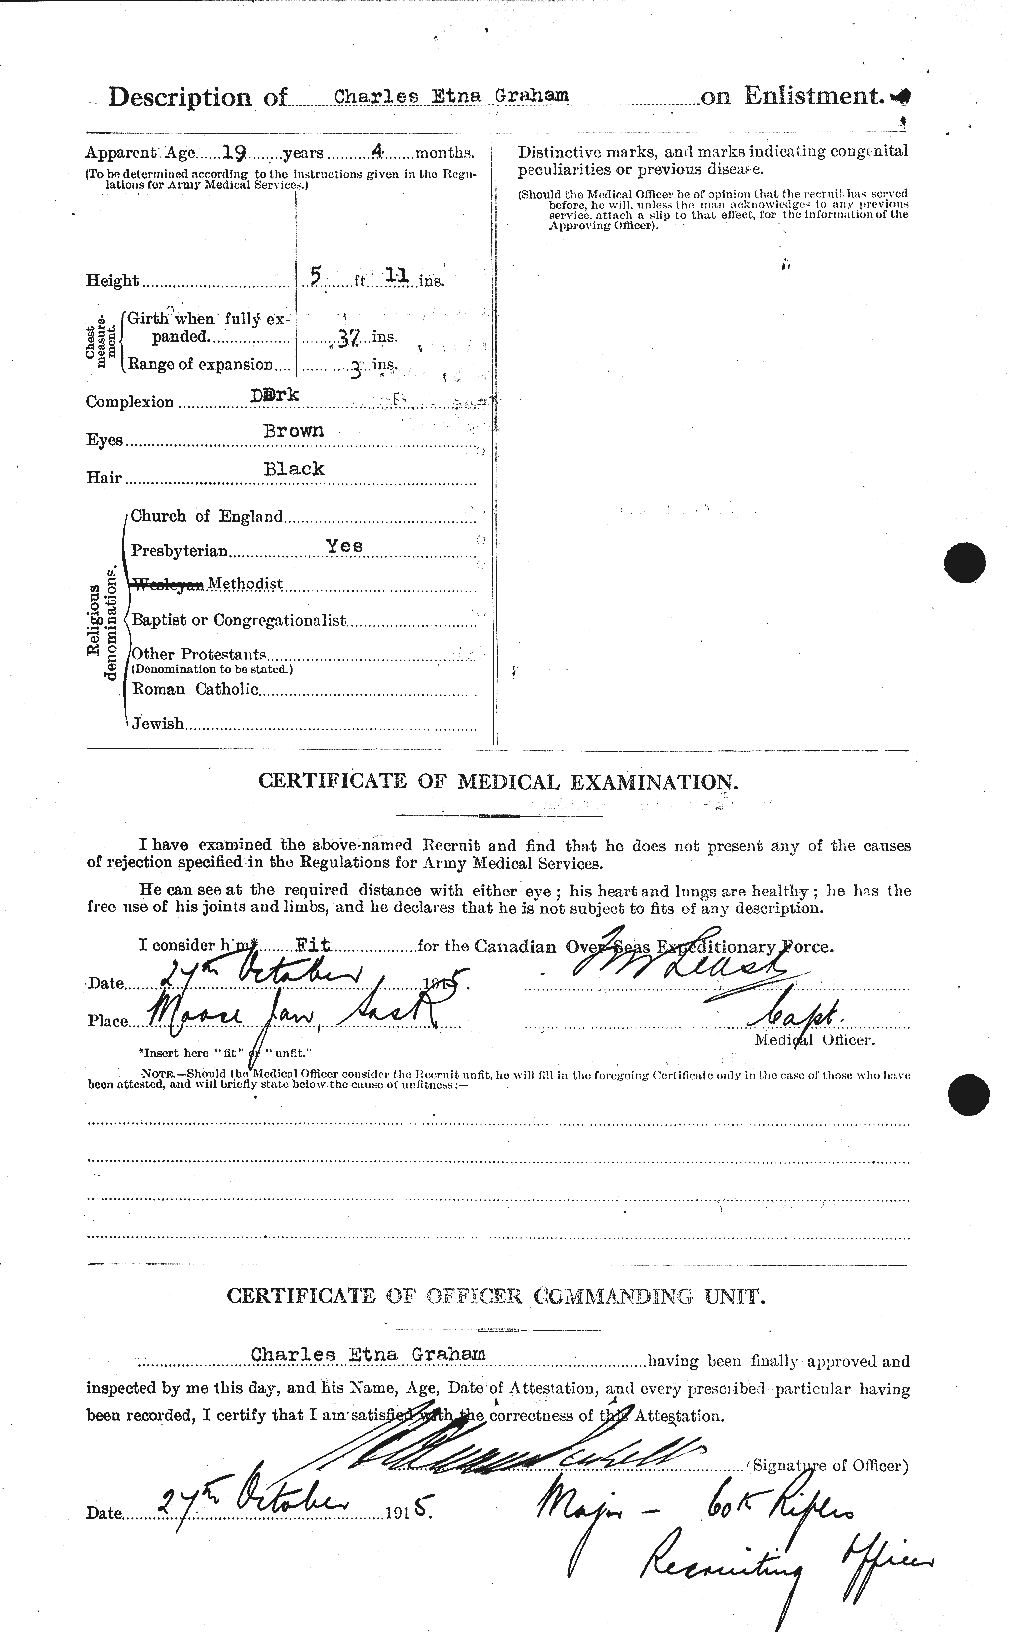 Personnel Records of the First World War - CEF 359711b